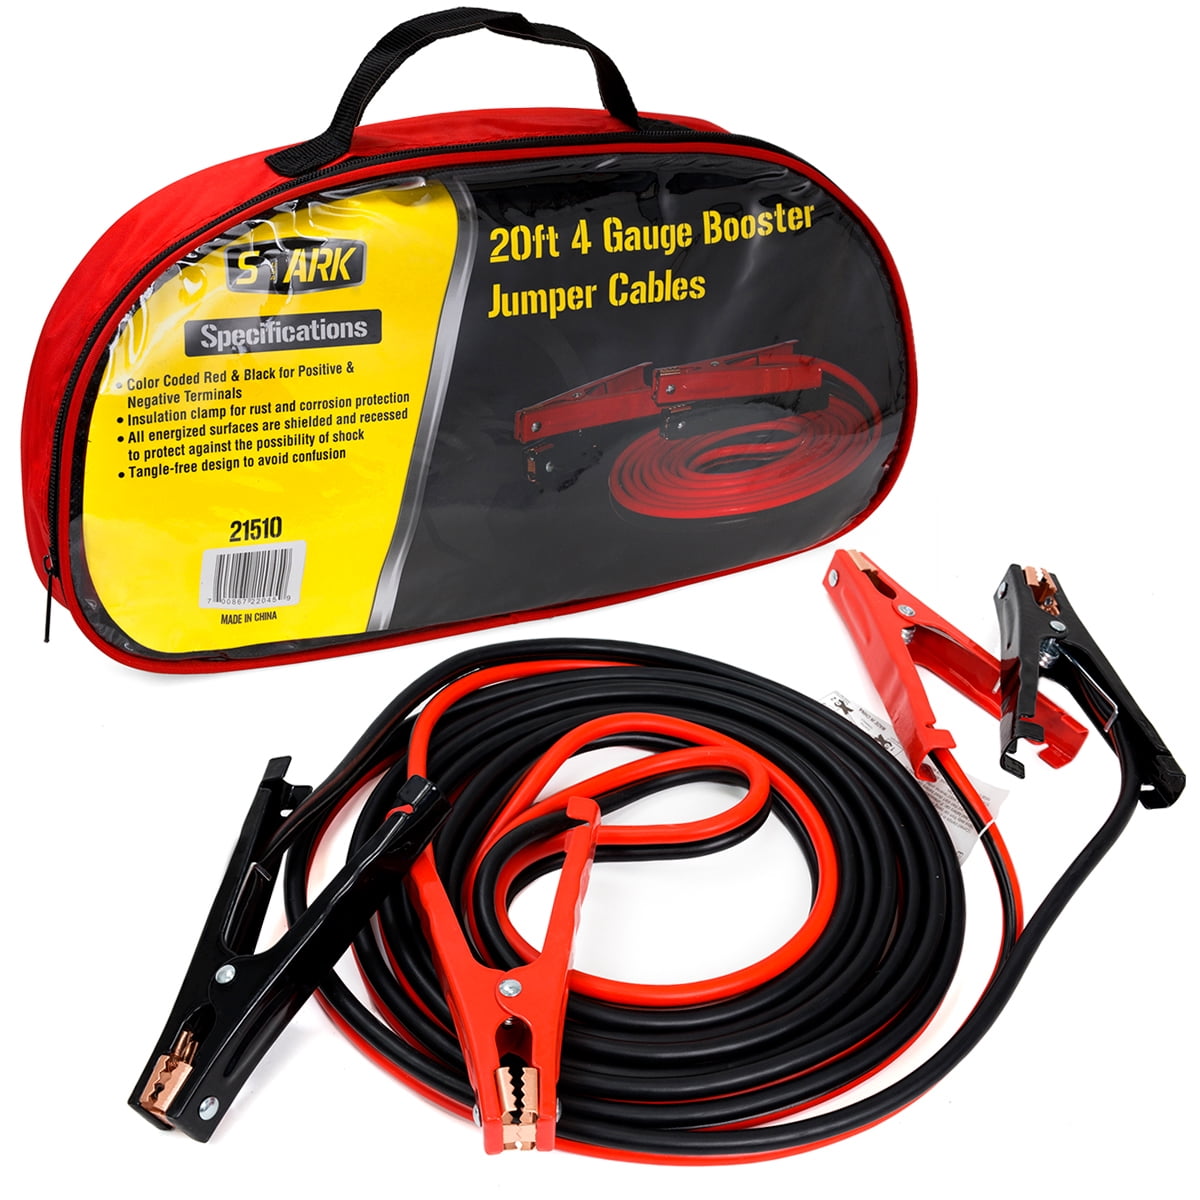 NEW HEAVY DUTY BOOSTER JUMPER CABLES 4 GUAGE UL LISTED CARRYING BAG 20 FEET 